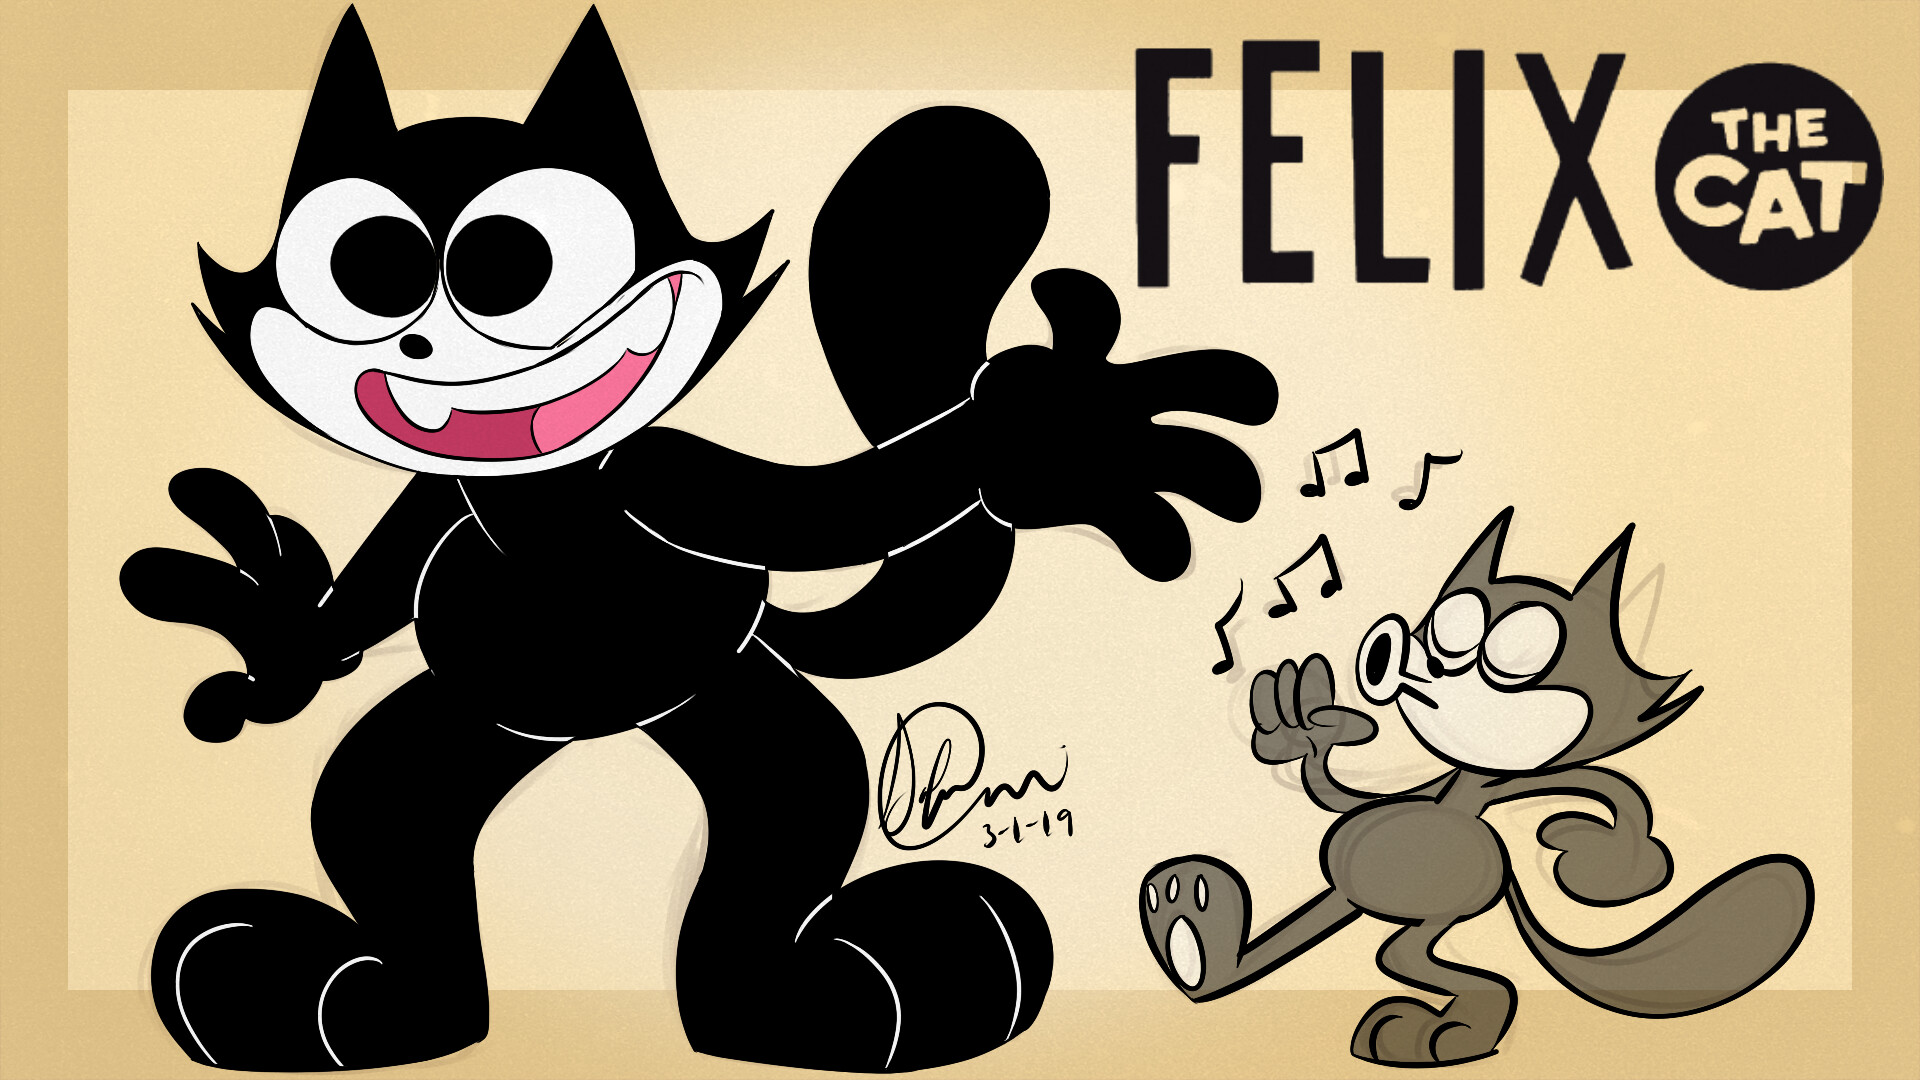 It's 2019 and when are we going to bring back Felix the Cat? 